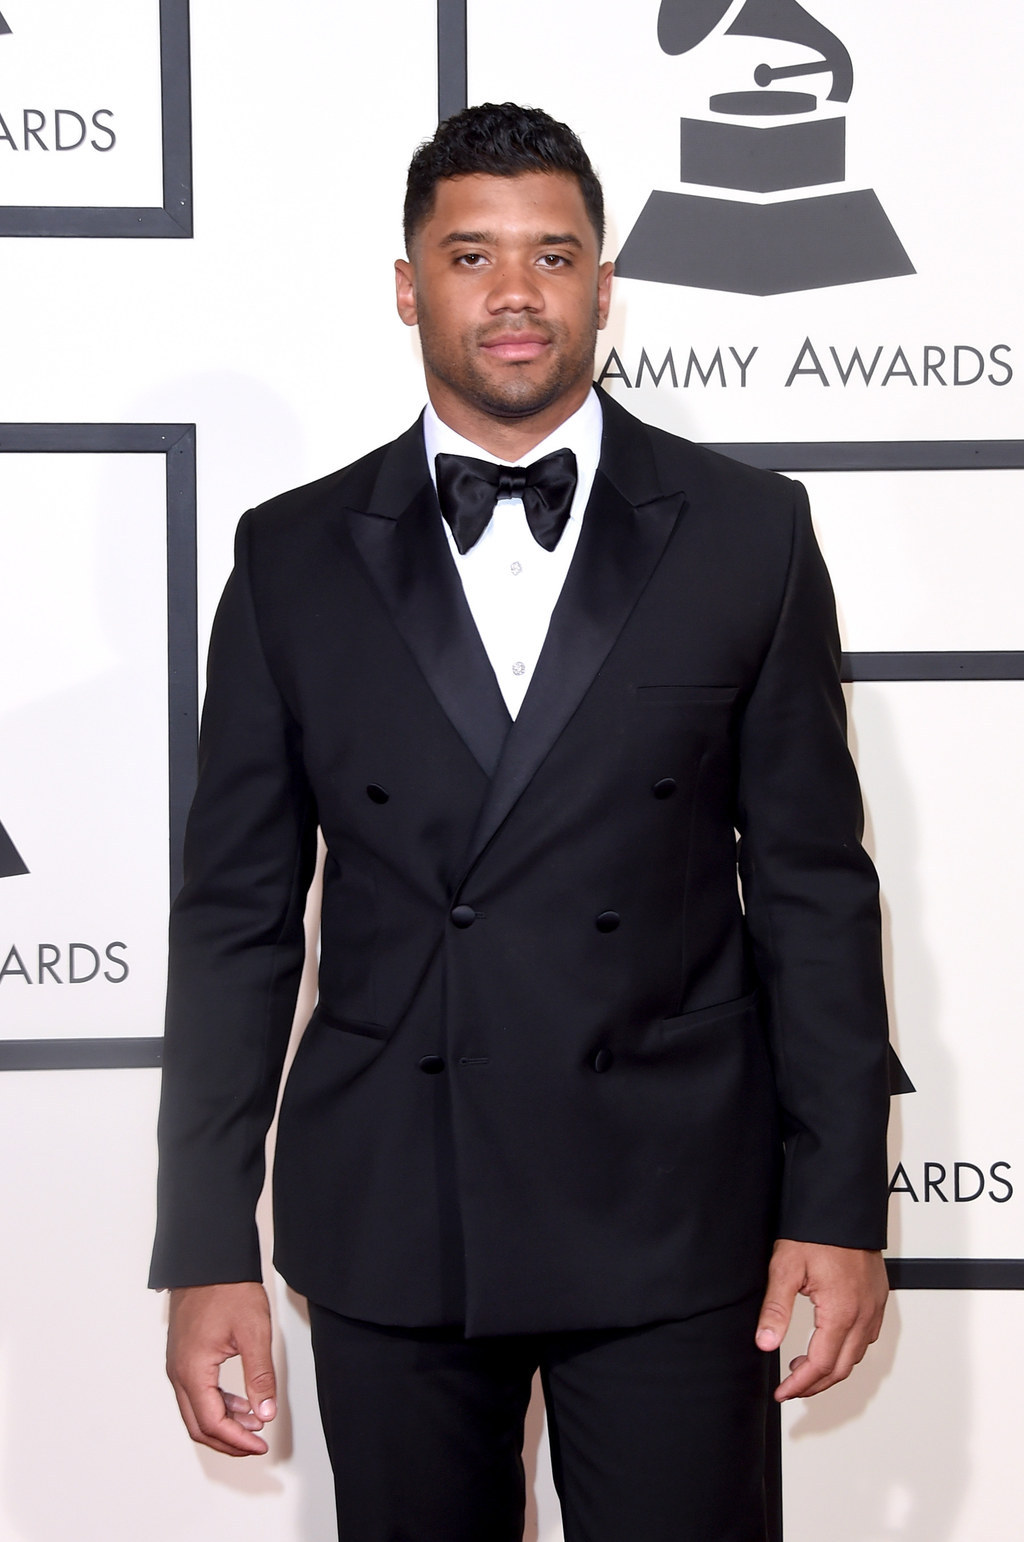 23 Of The Best-Dressed Guys At The 2016 Grammys